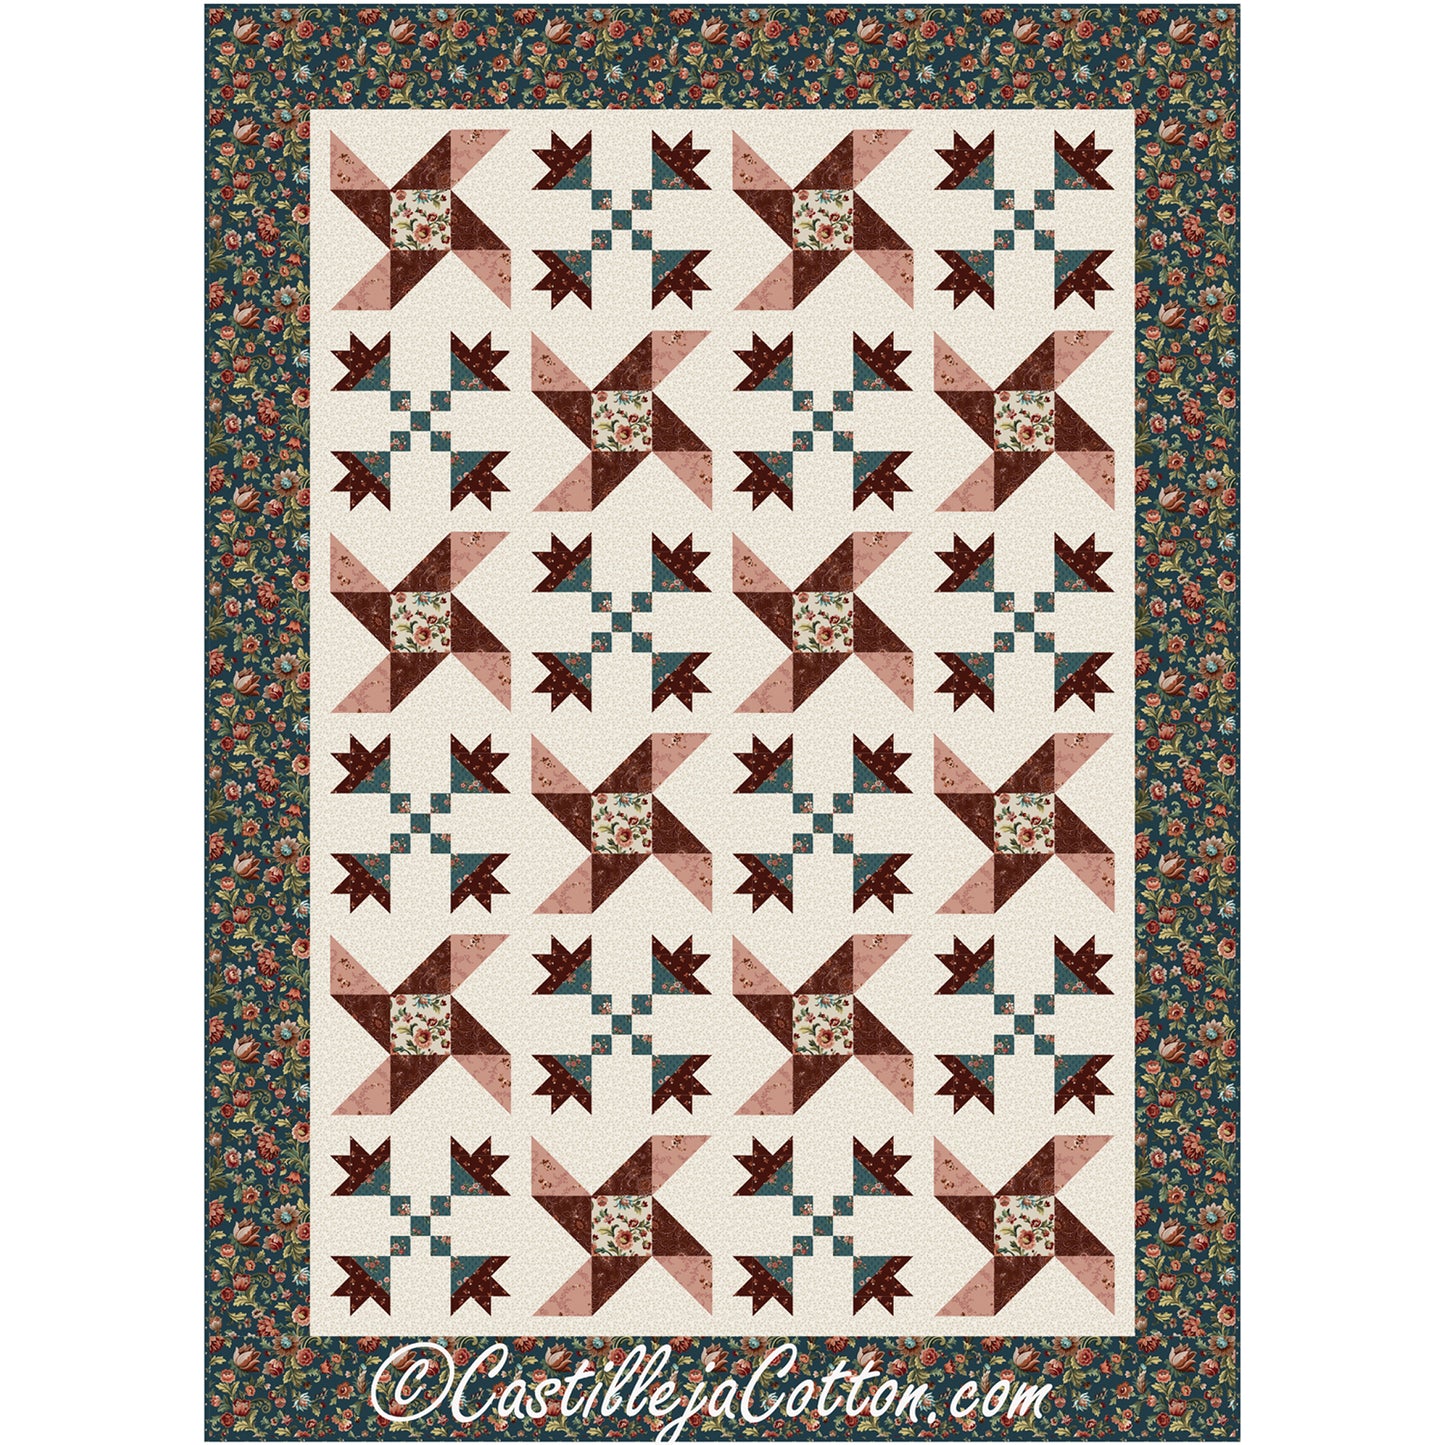 Beautiful quilt in mostly brown and pink with denim blue and cream with a flowers and pinwheel design.